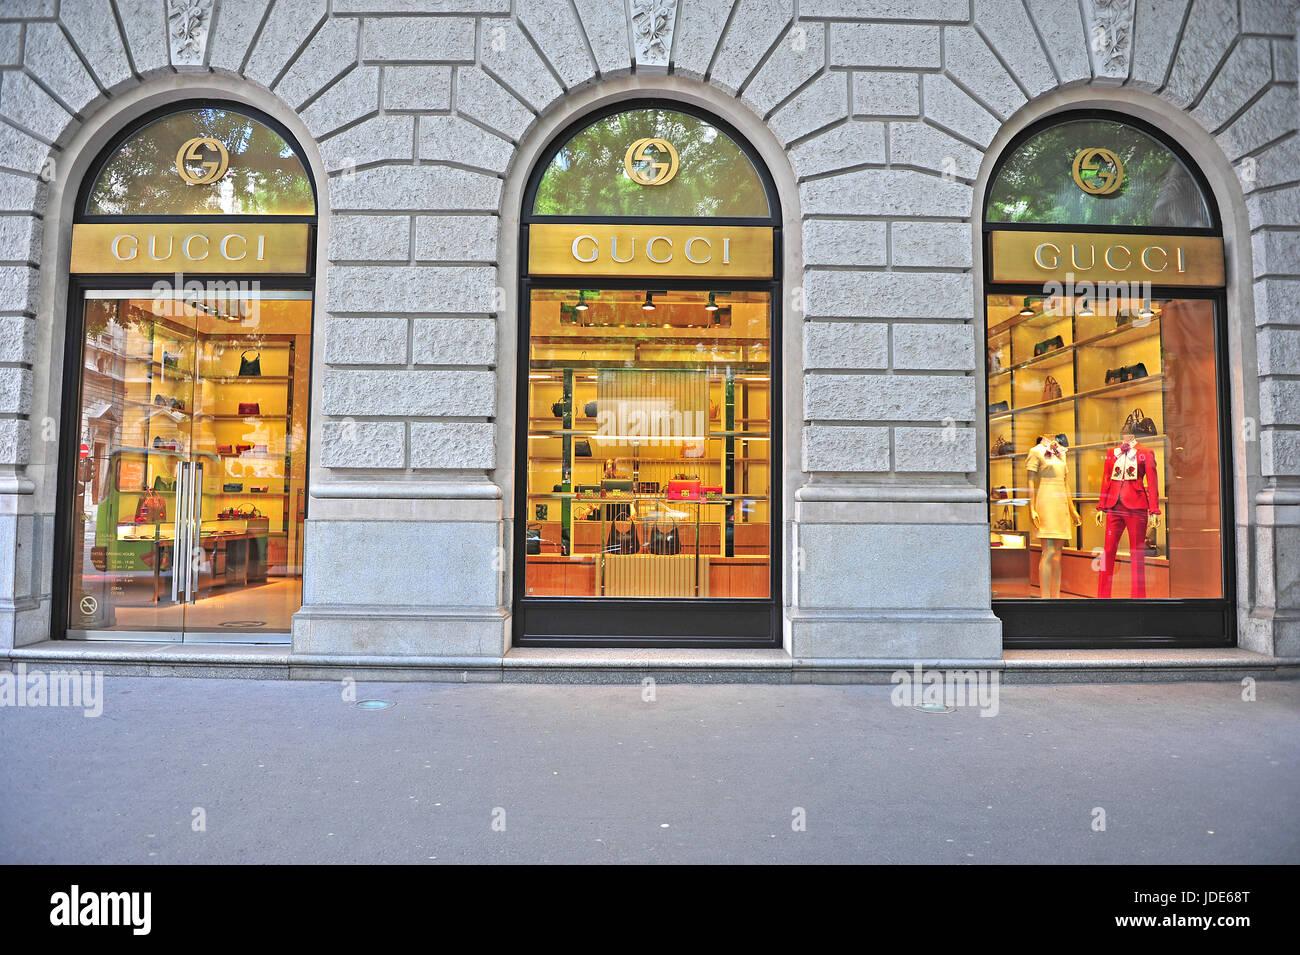 BUDAPEST, HUNGARY - JUNE 4: Facade of Gucci flagship store in the street of  Budapest on June 4, 2016 Stock Photo - Alamy